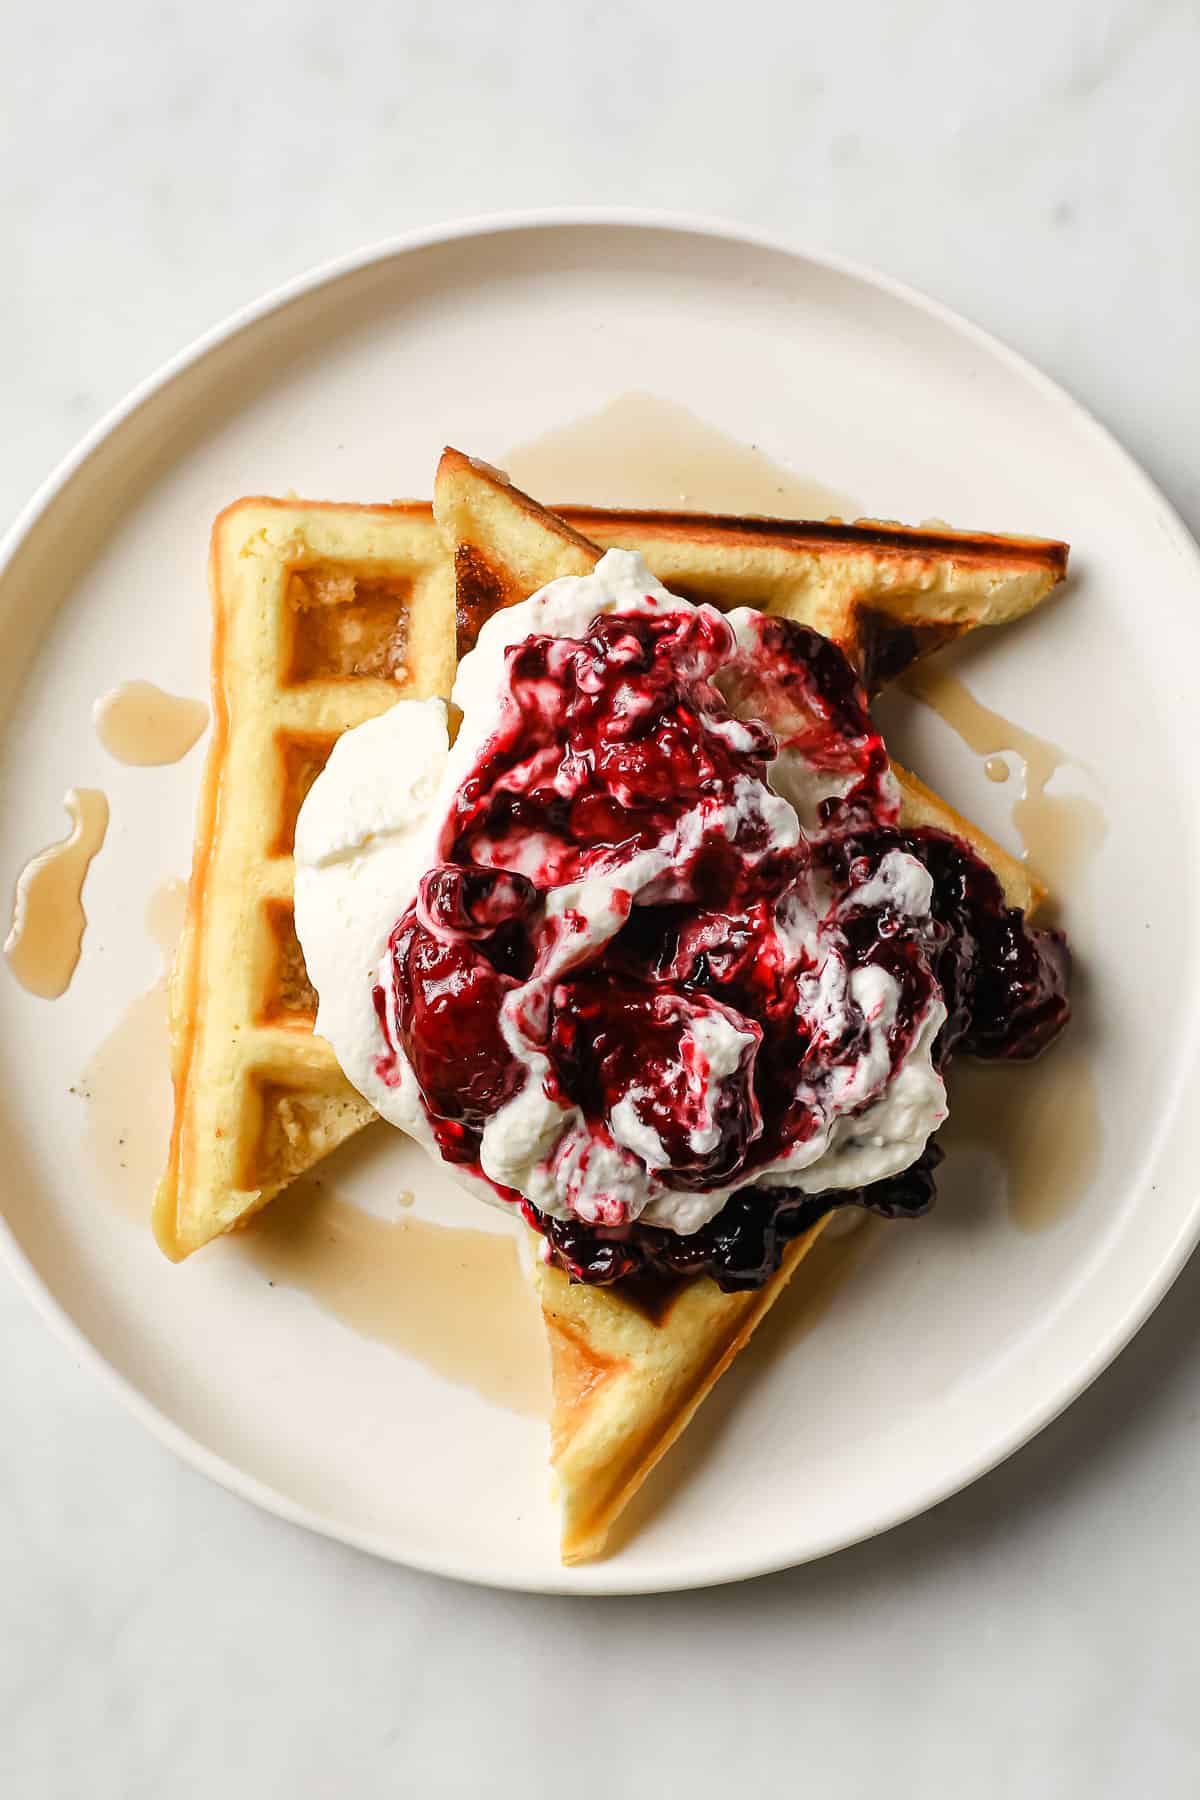 keto waffles topped with syrup, low carb jam, and homemade whipped cream